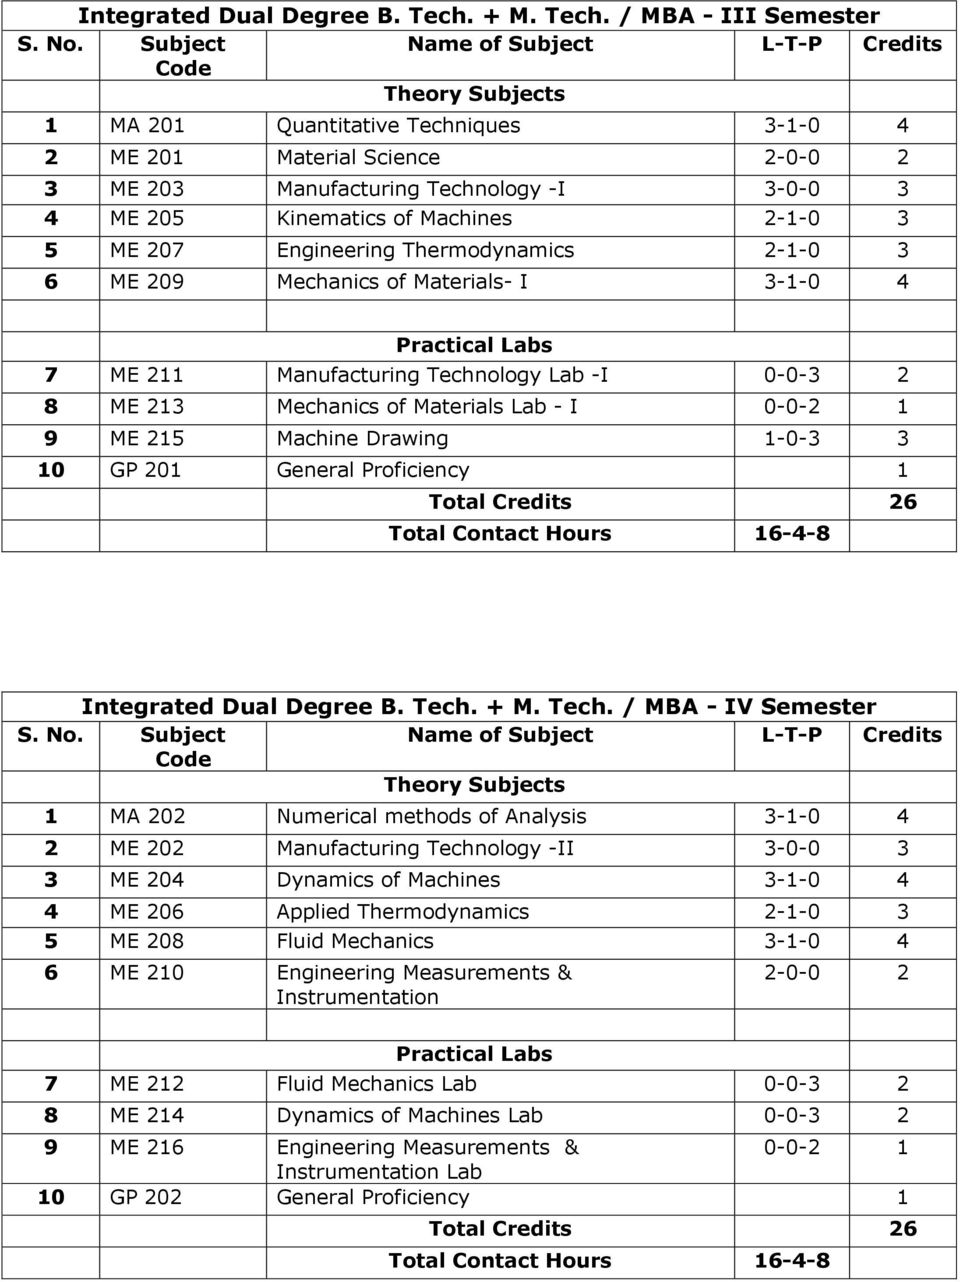 207 Engineering Thermodynamics 2-1-0 3 6 ME 209 Mechanics of Materials- I 7 ME 211 Manufacturing Technology Lab -I 0-0-3 2 8 ME 213 Mechanics of Materials Lab - I 9 ME 215 Machine Drawing 1-0-3 3 10